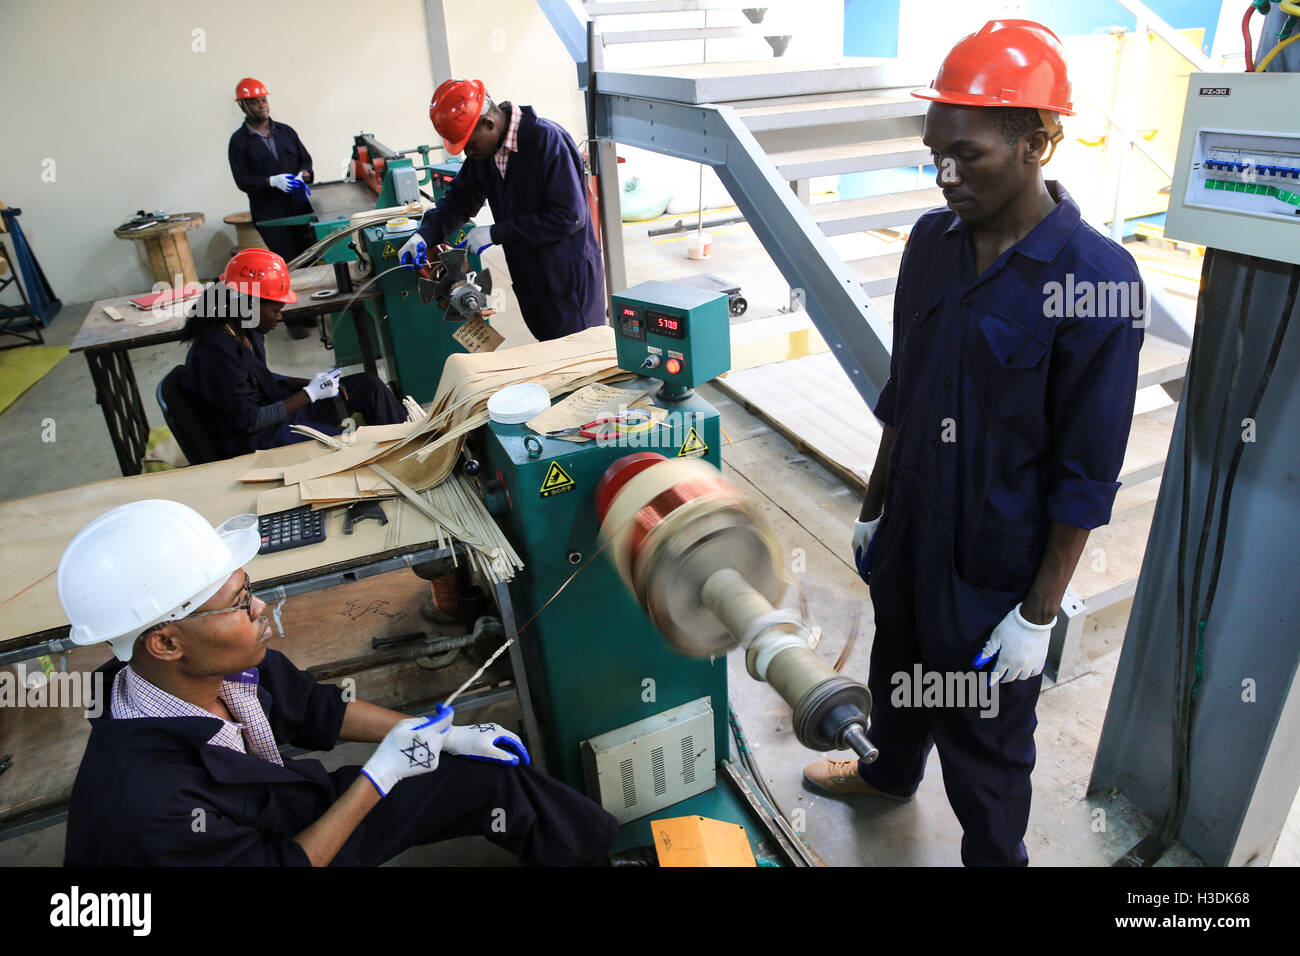 Nairobi, Kenya. 5th Oct, 2016. Kenyan technicians work at Yocean manufacturing transformers factory on the outskirts of Nairobi, Kenya, on Oct. 5, 2016. Kenya's first transfomer-manufacturing plant, set up by Chinese company Yocean Group, opened on Wednesday. Kenya has been relying on transformers from abroad, mostly from India. Kenya's Cabinet Secretary for Energy and Petroleum, Charles Keter, said the plant will ease procurement of transformers and other electrical appliances. © Pan Siwei/Xinhua/Alamy Live News Stock Photo